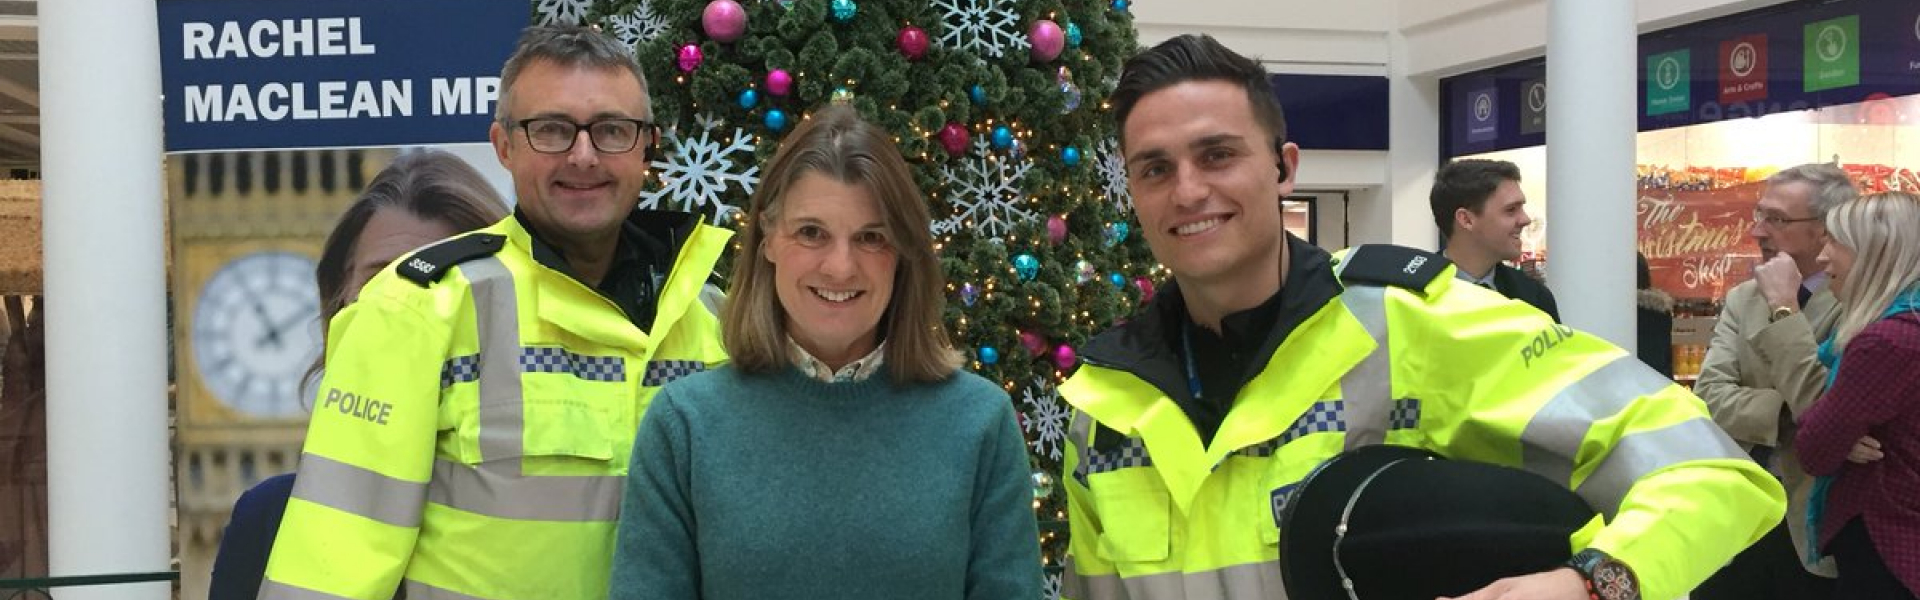 Rachel Maclean, MP for Redditch County, has welcomed West Mercia Police’s transformation programme which will result in more police officers patrolling our streets.